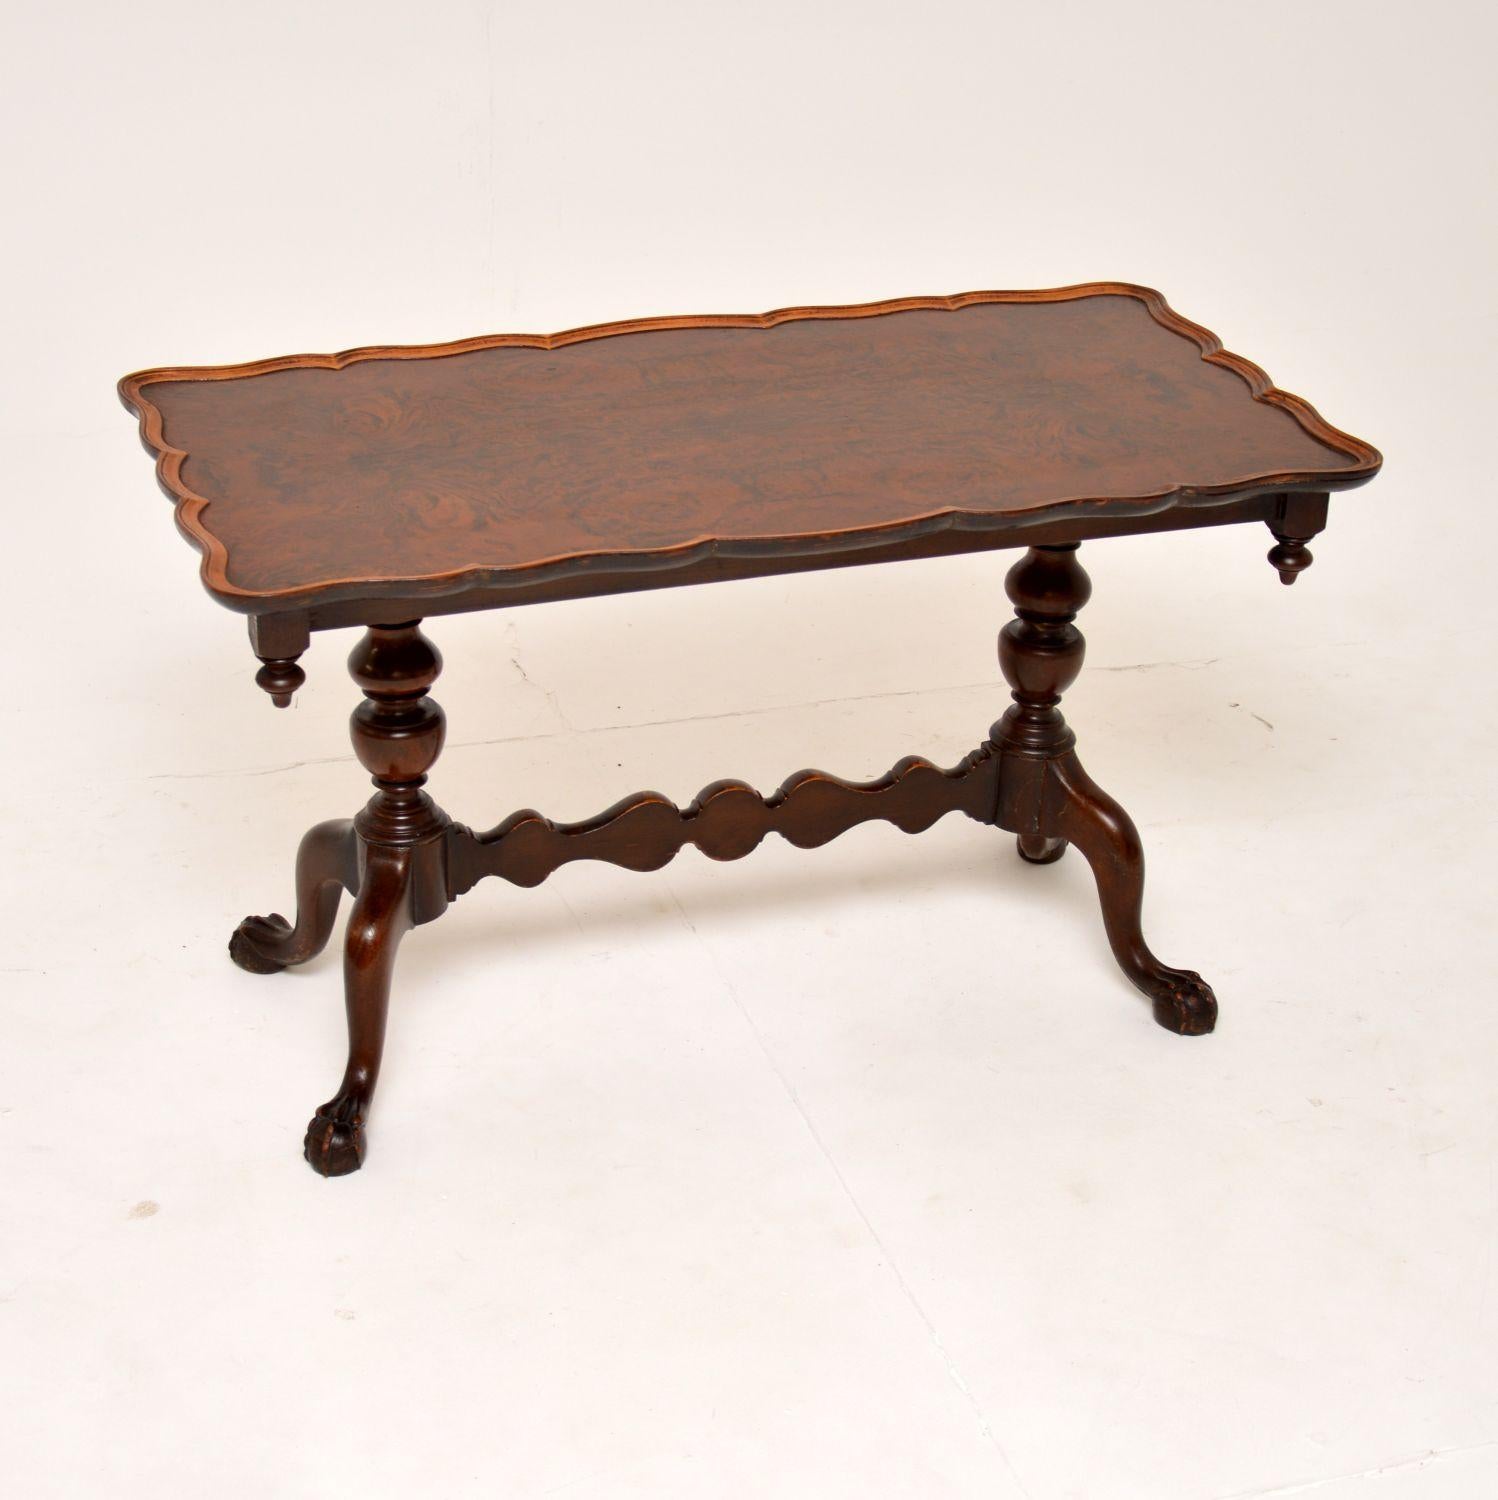 A stunning antique walnut coffee table, made in England and dating from the 1920-30’s.

This is beautifully made, with a lovely pie crust top and a shaped stretchered base, terminating in claw and ball feet. The burr walnut grain patterns on the